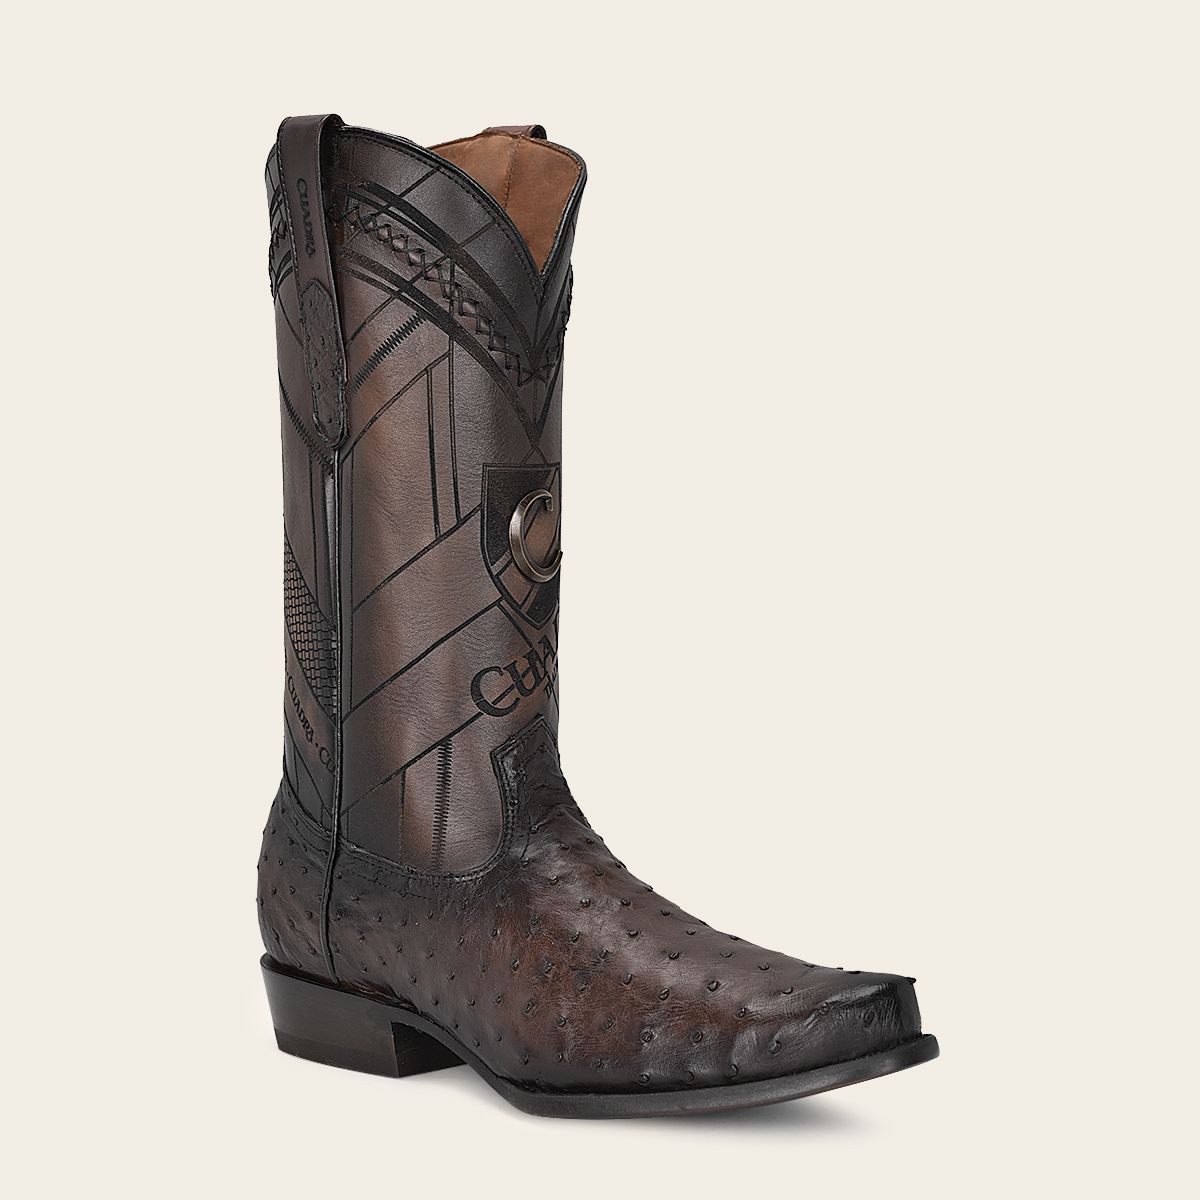 S42FA1 - Cuadra brown dress cowboy ostrich leather boots for men